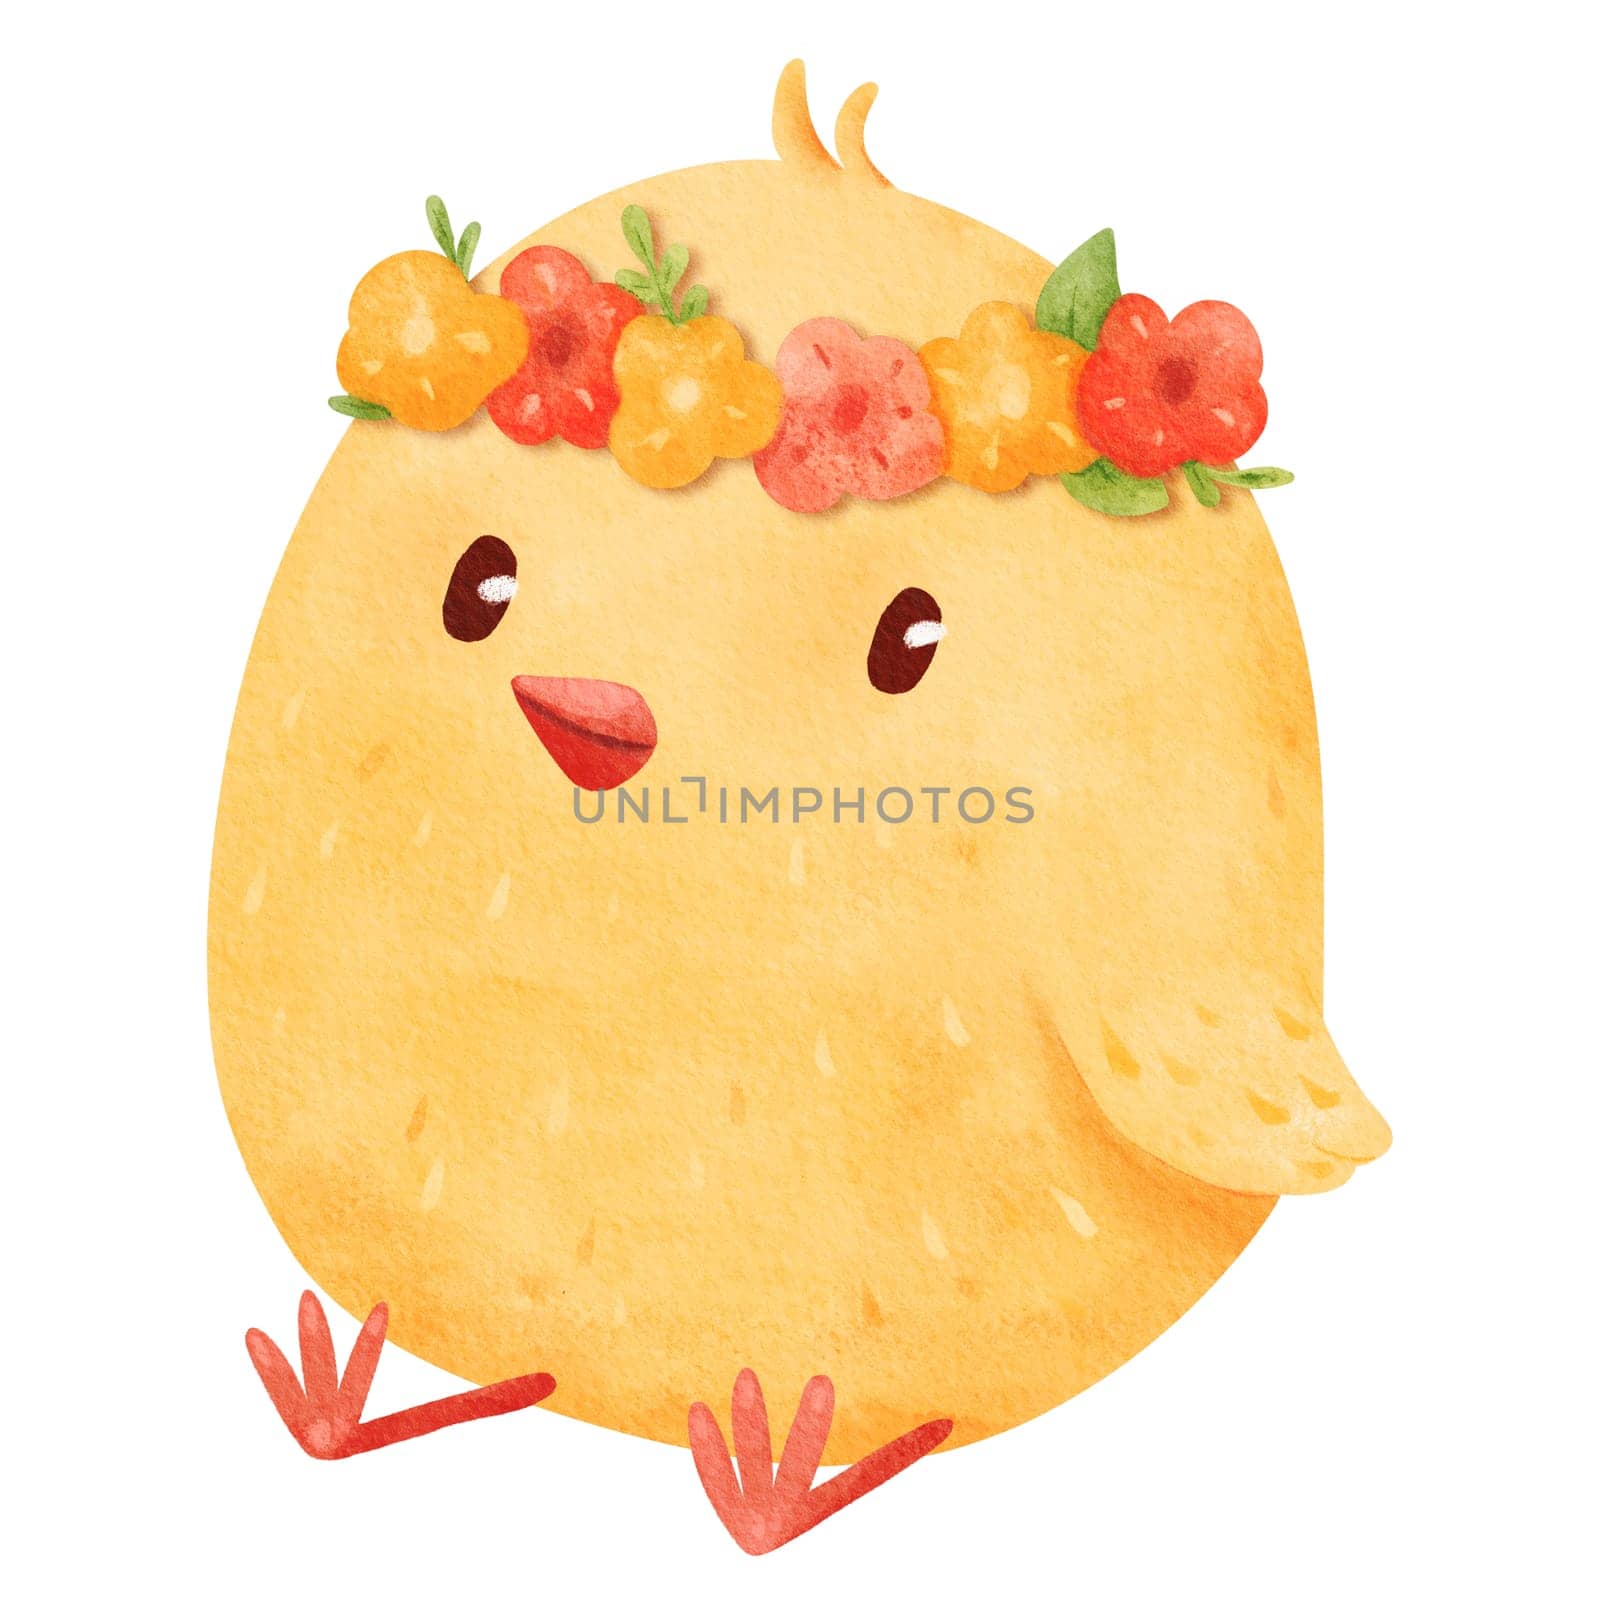 Charming, fluffy yellow chick sitting in a vibrant floral wreath. Cartoon-style illustration capturing the whimsical charm of a playful little bird. for conveying a cheerful and lively atmosphere.